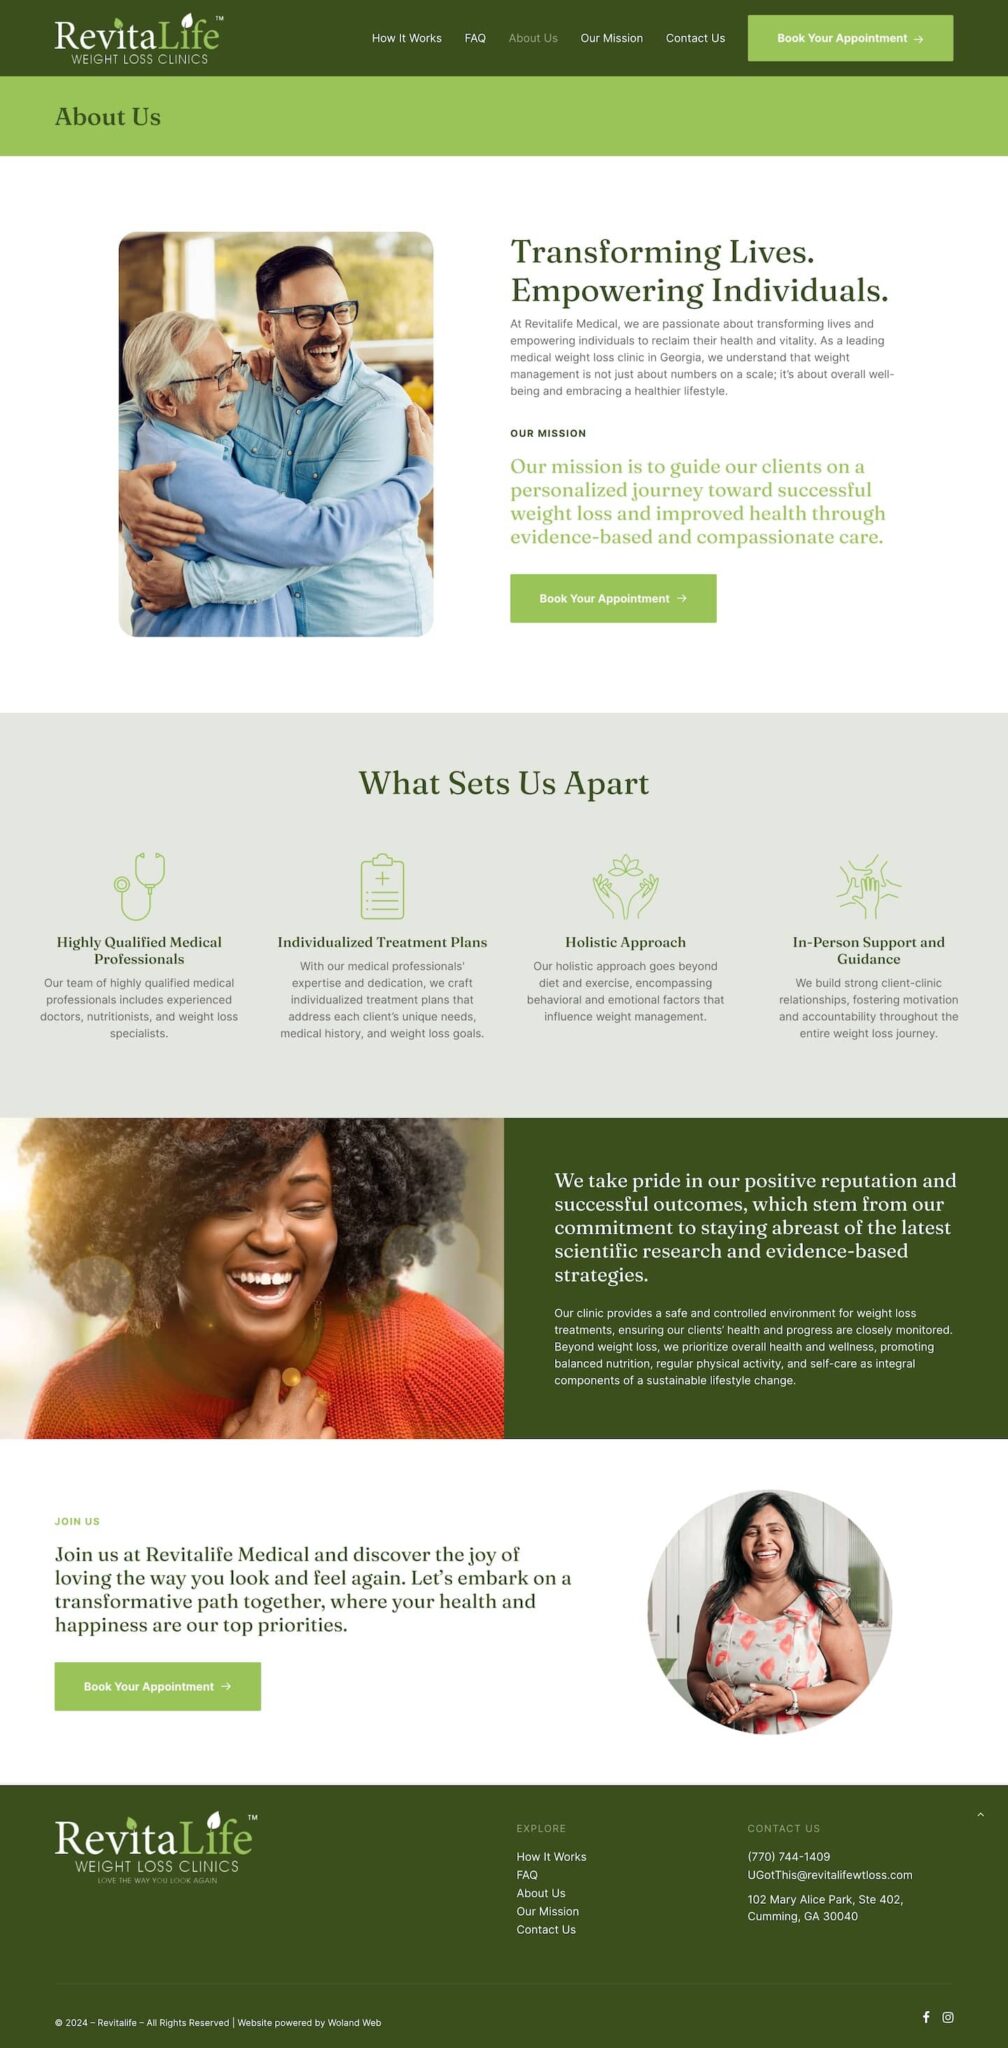 Revitalife website-screenshot of about page